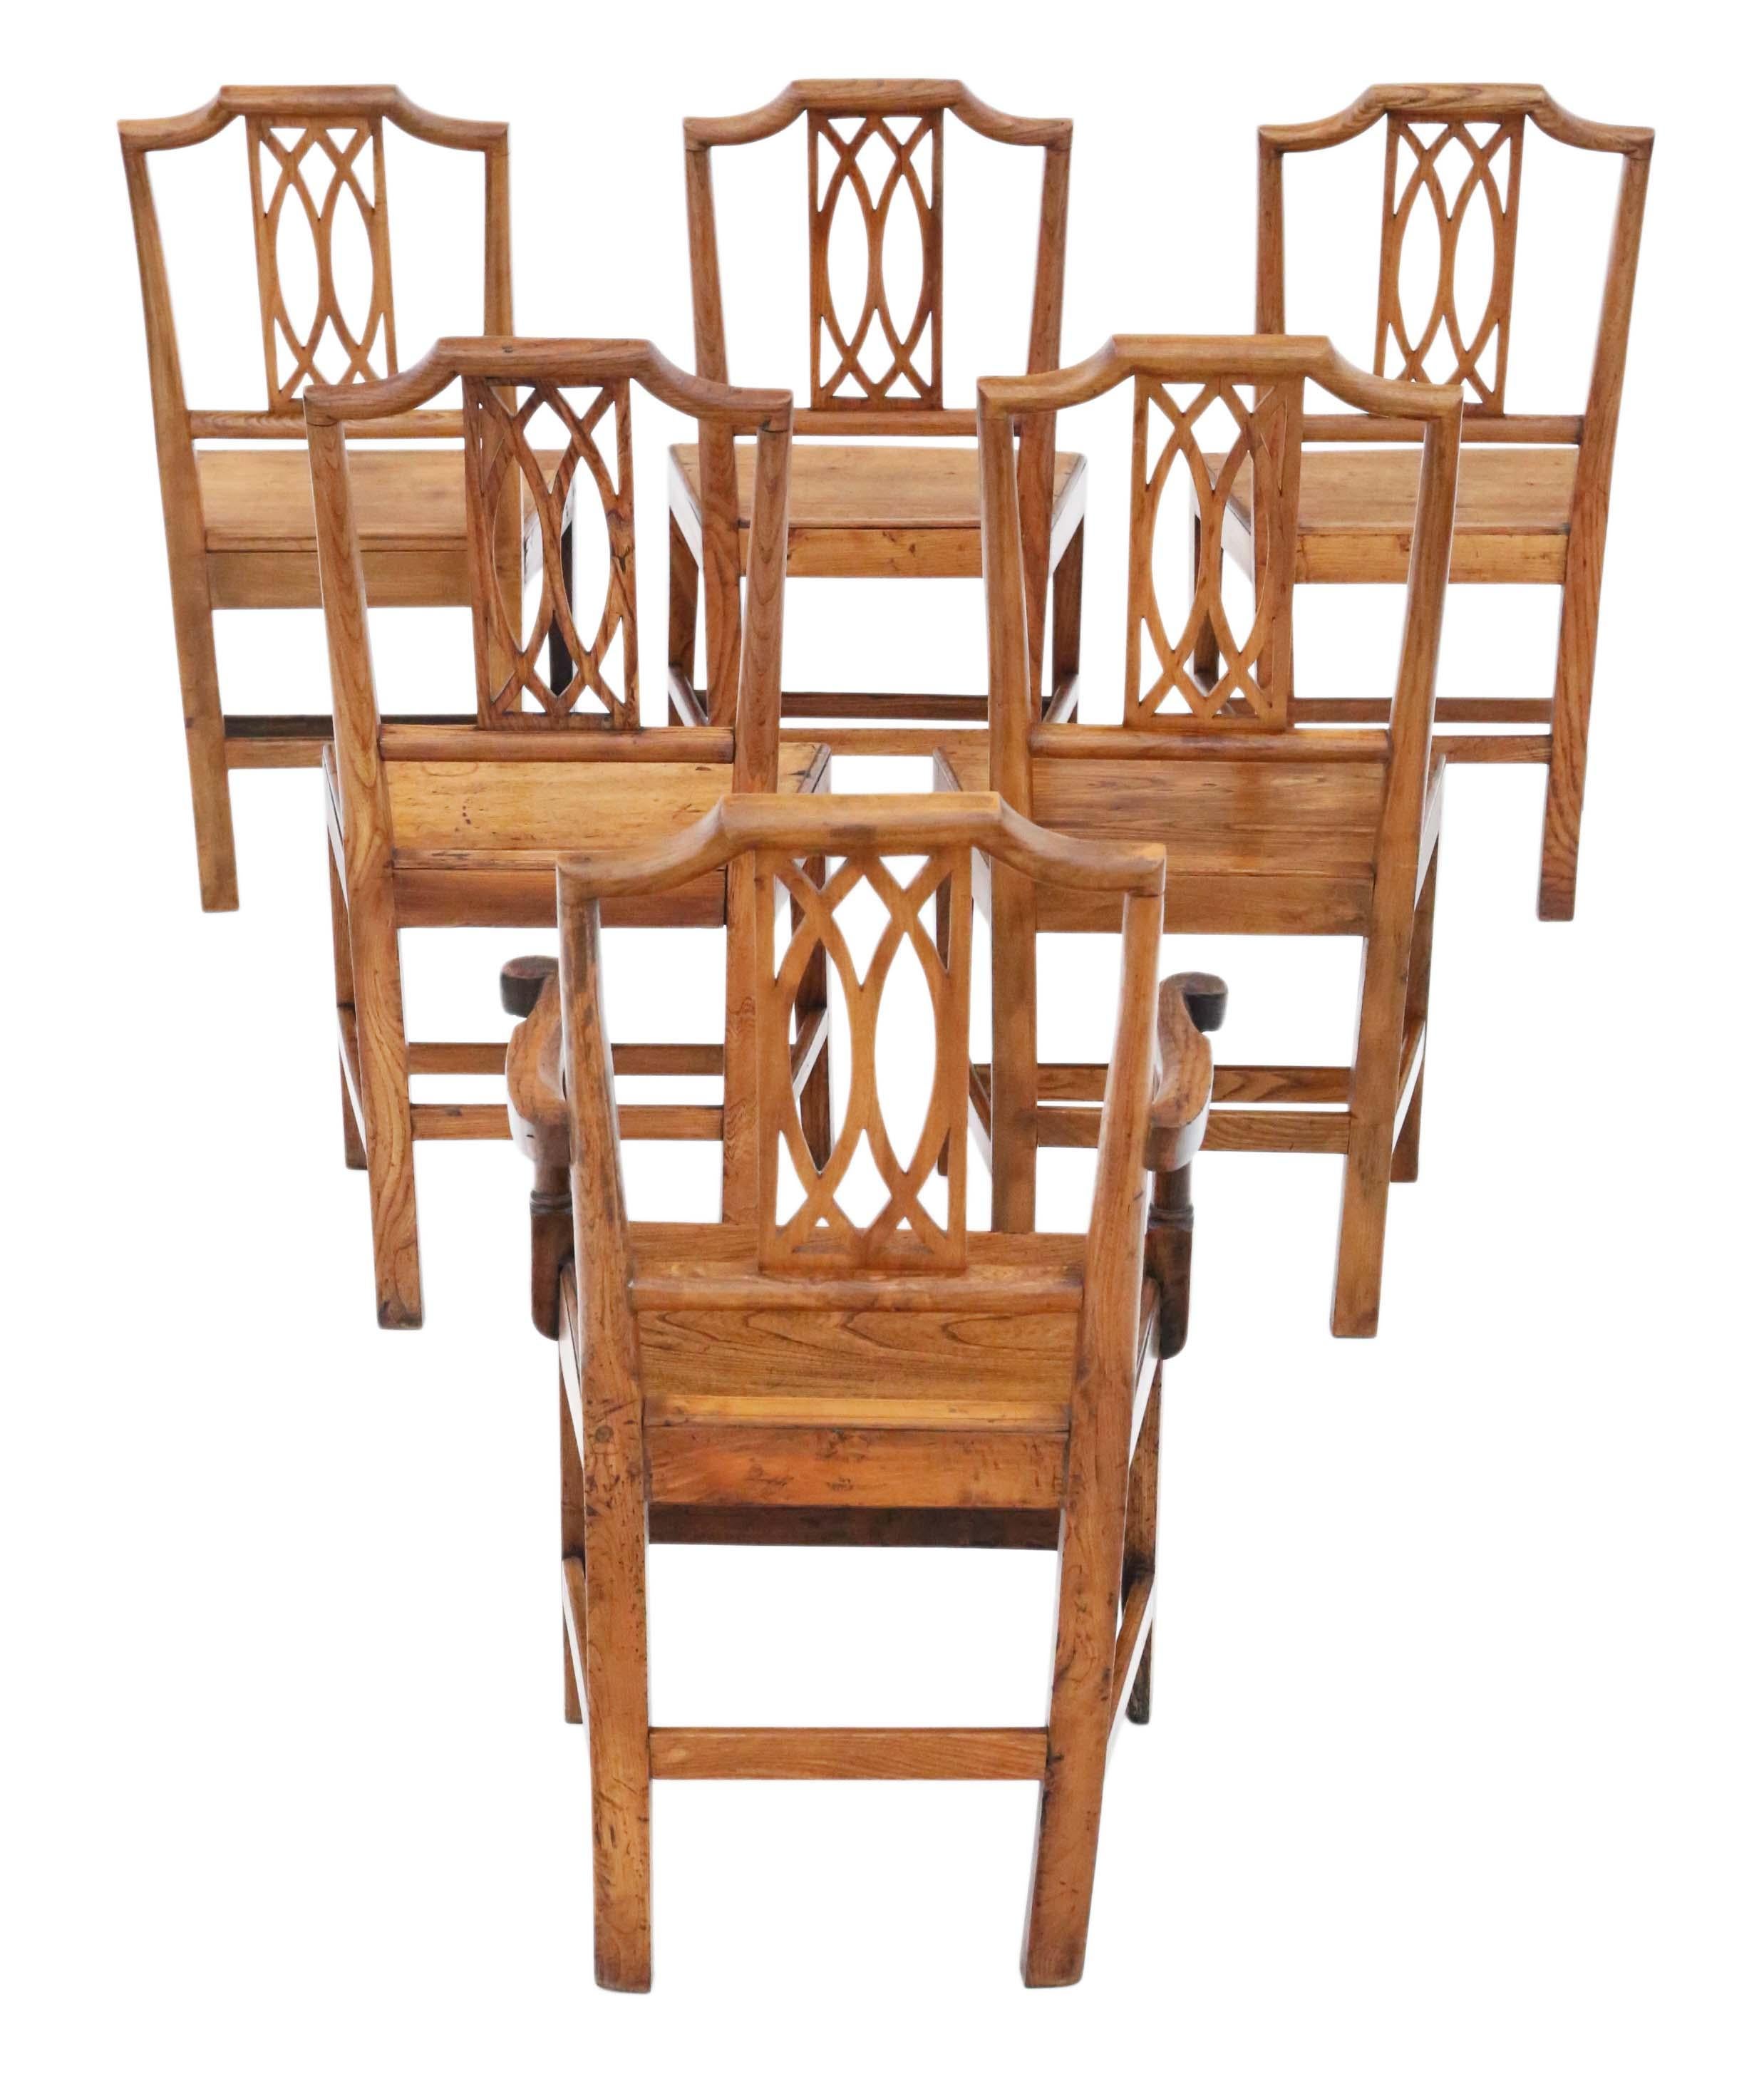 19th Century Elm Kitchen Dining Chairs: Set of 6 (5+1), Antique Quality In Good Condition For Sale In Wisbech, Cambridgeshire